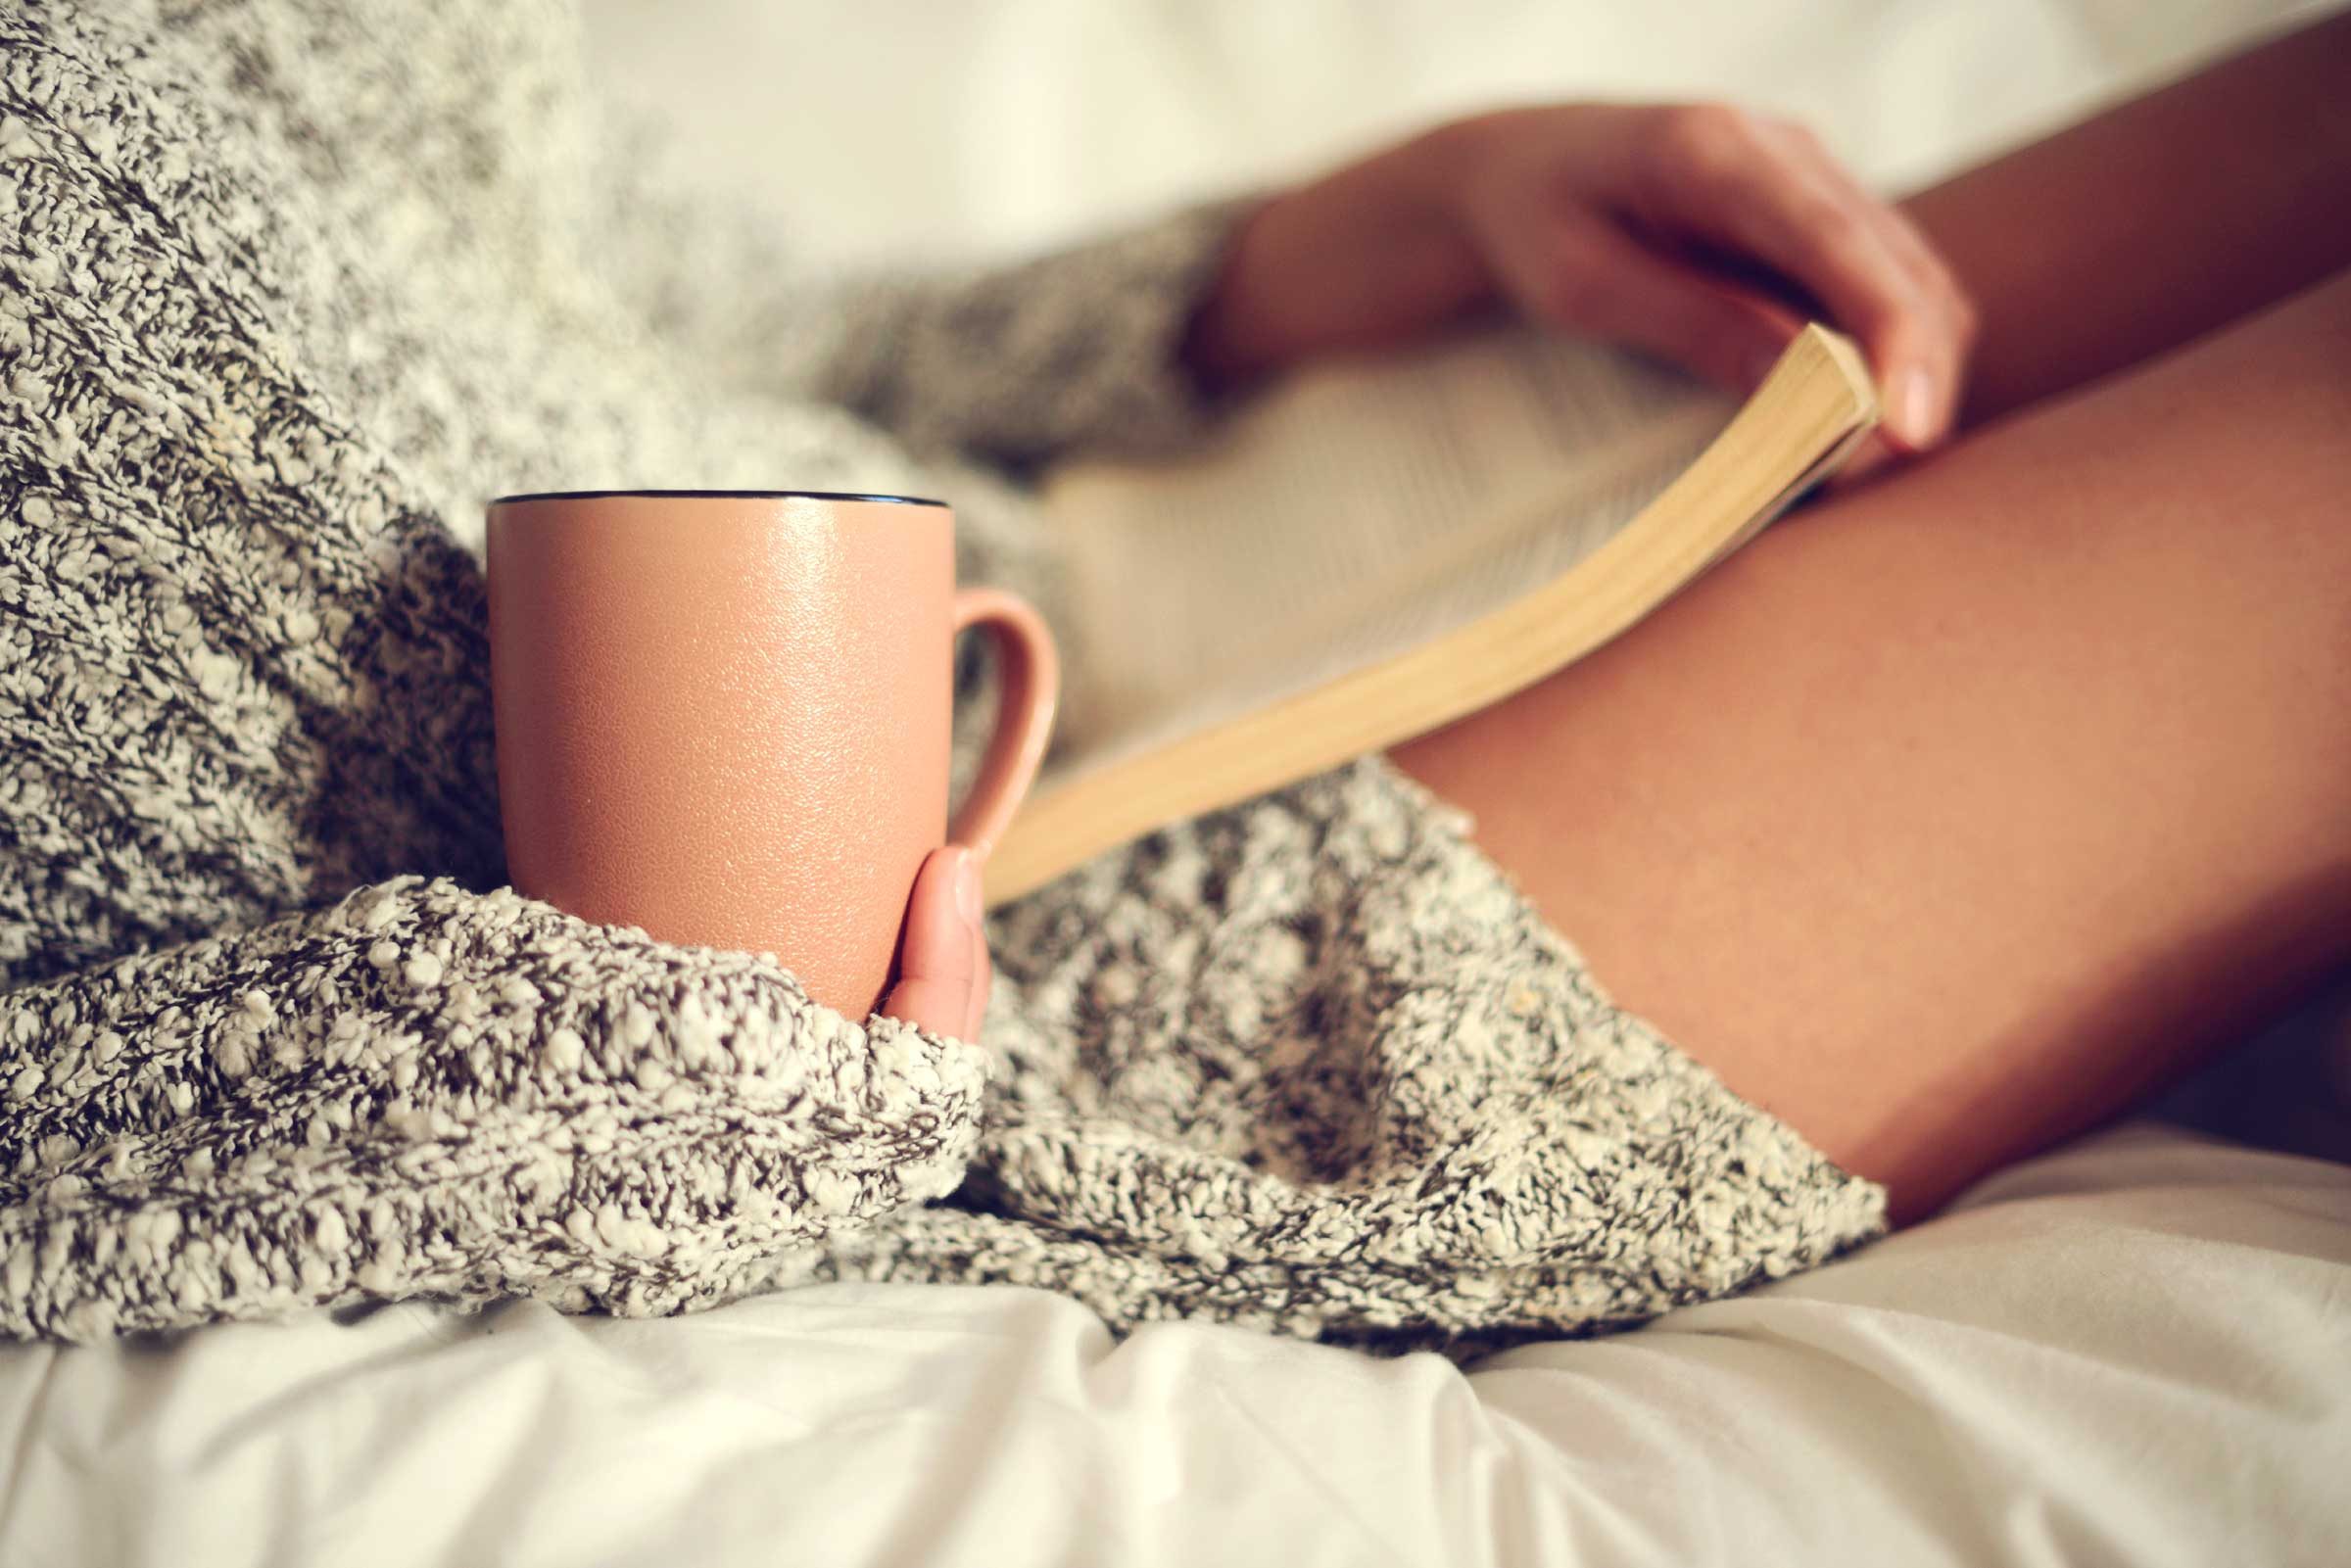 Sick During the Holidays? 7 Unexpected Reasons You’re Under the Weather